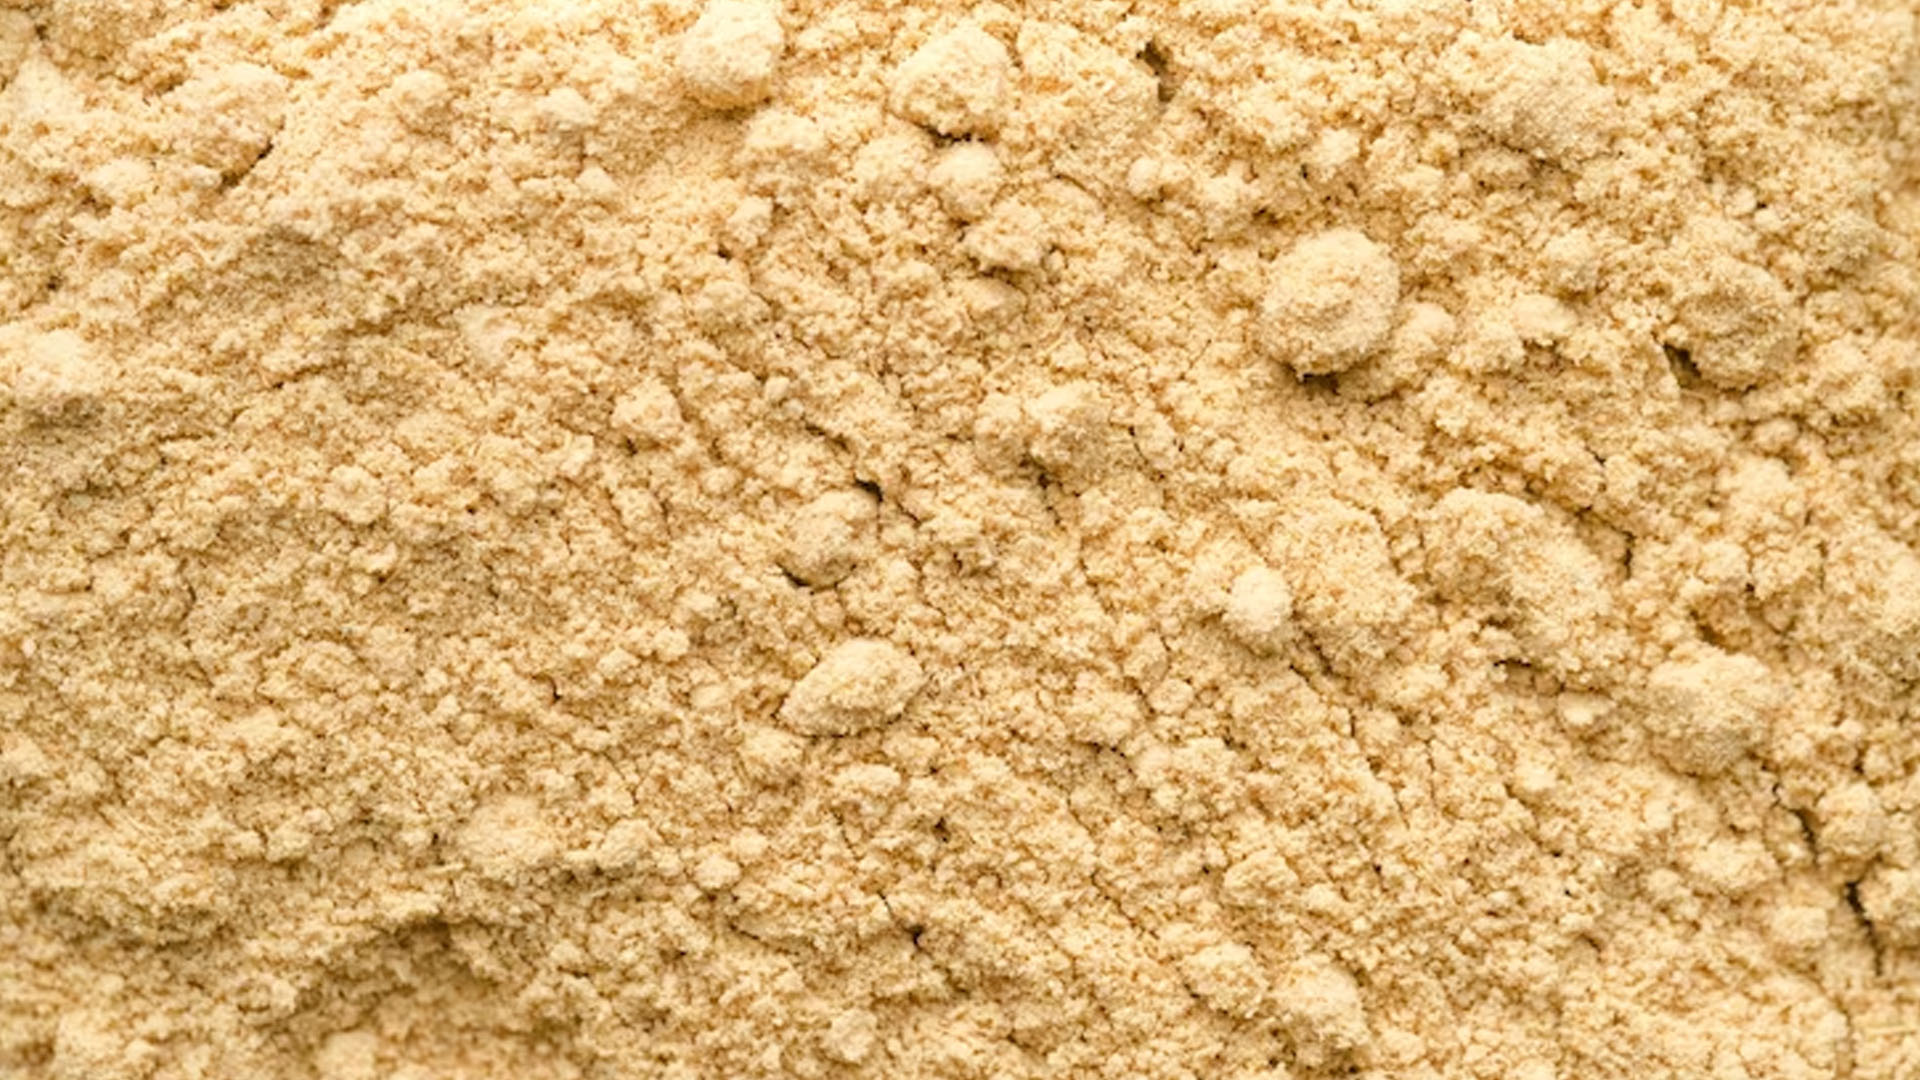 What Are The Health Benefits of Maca?